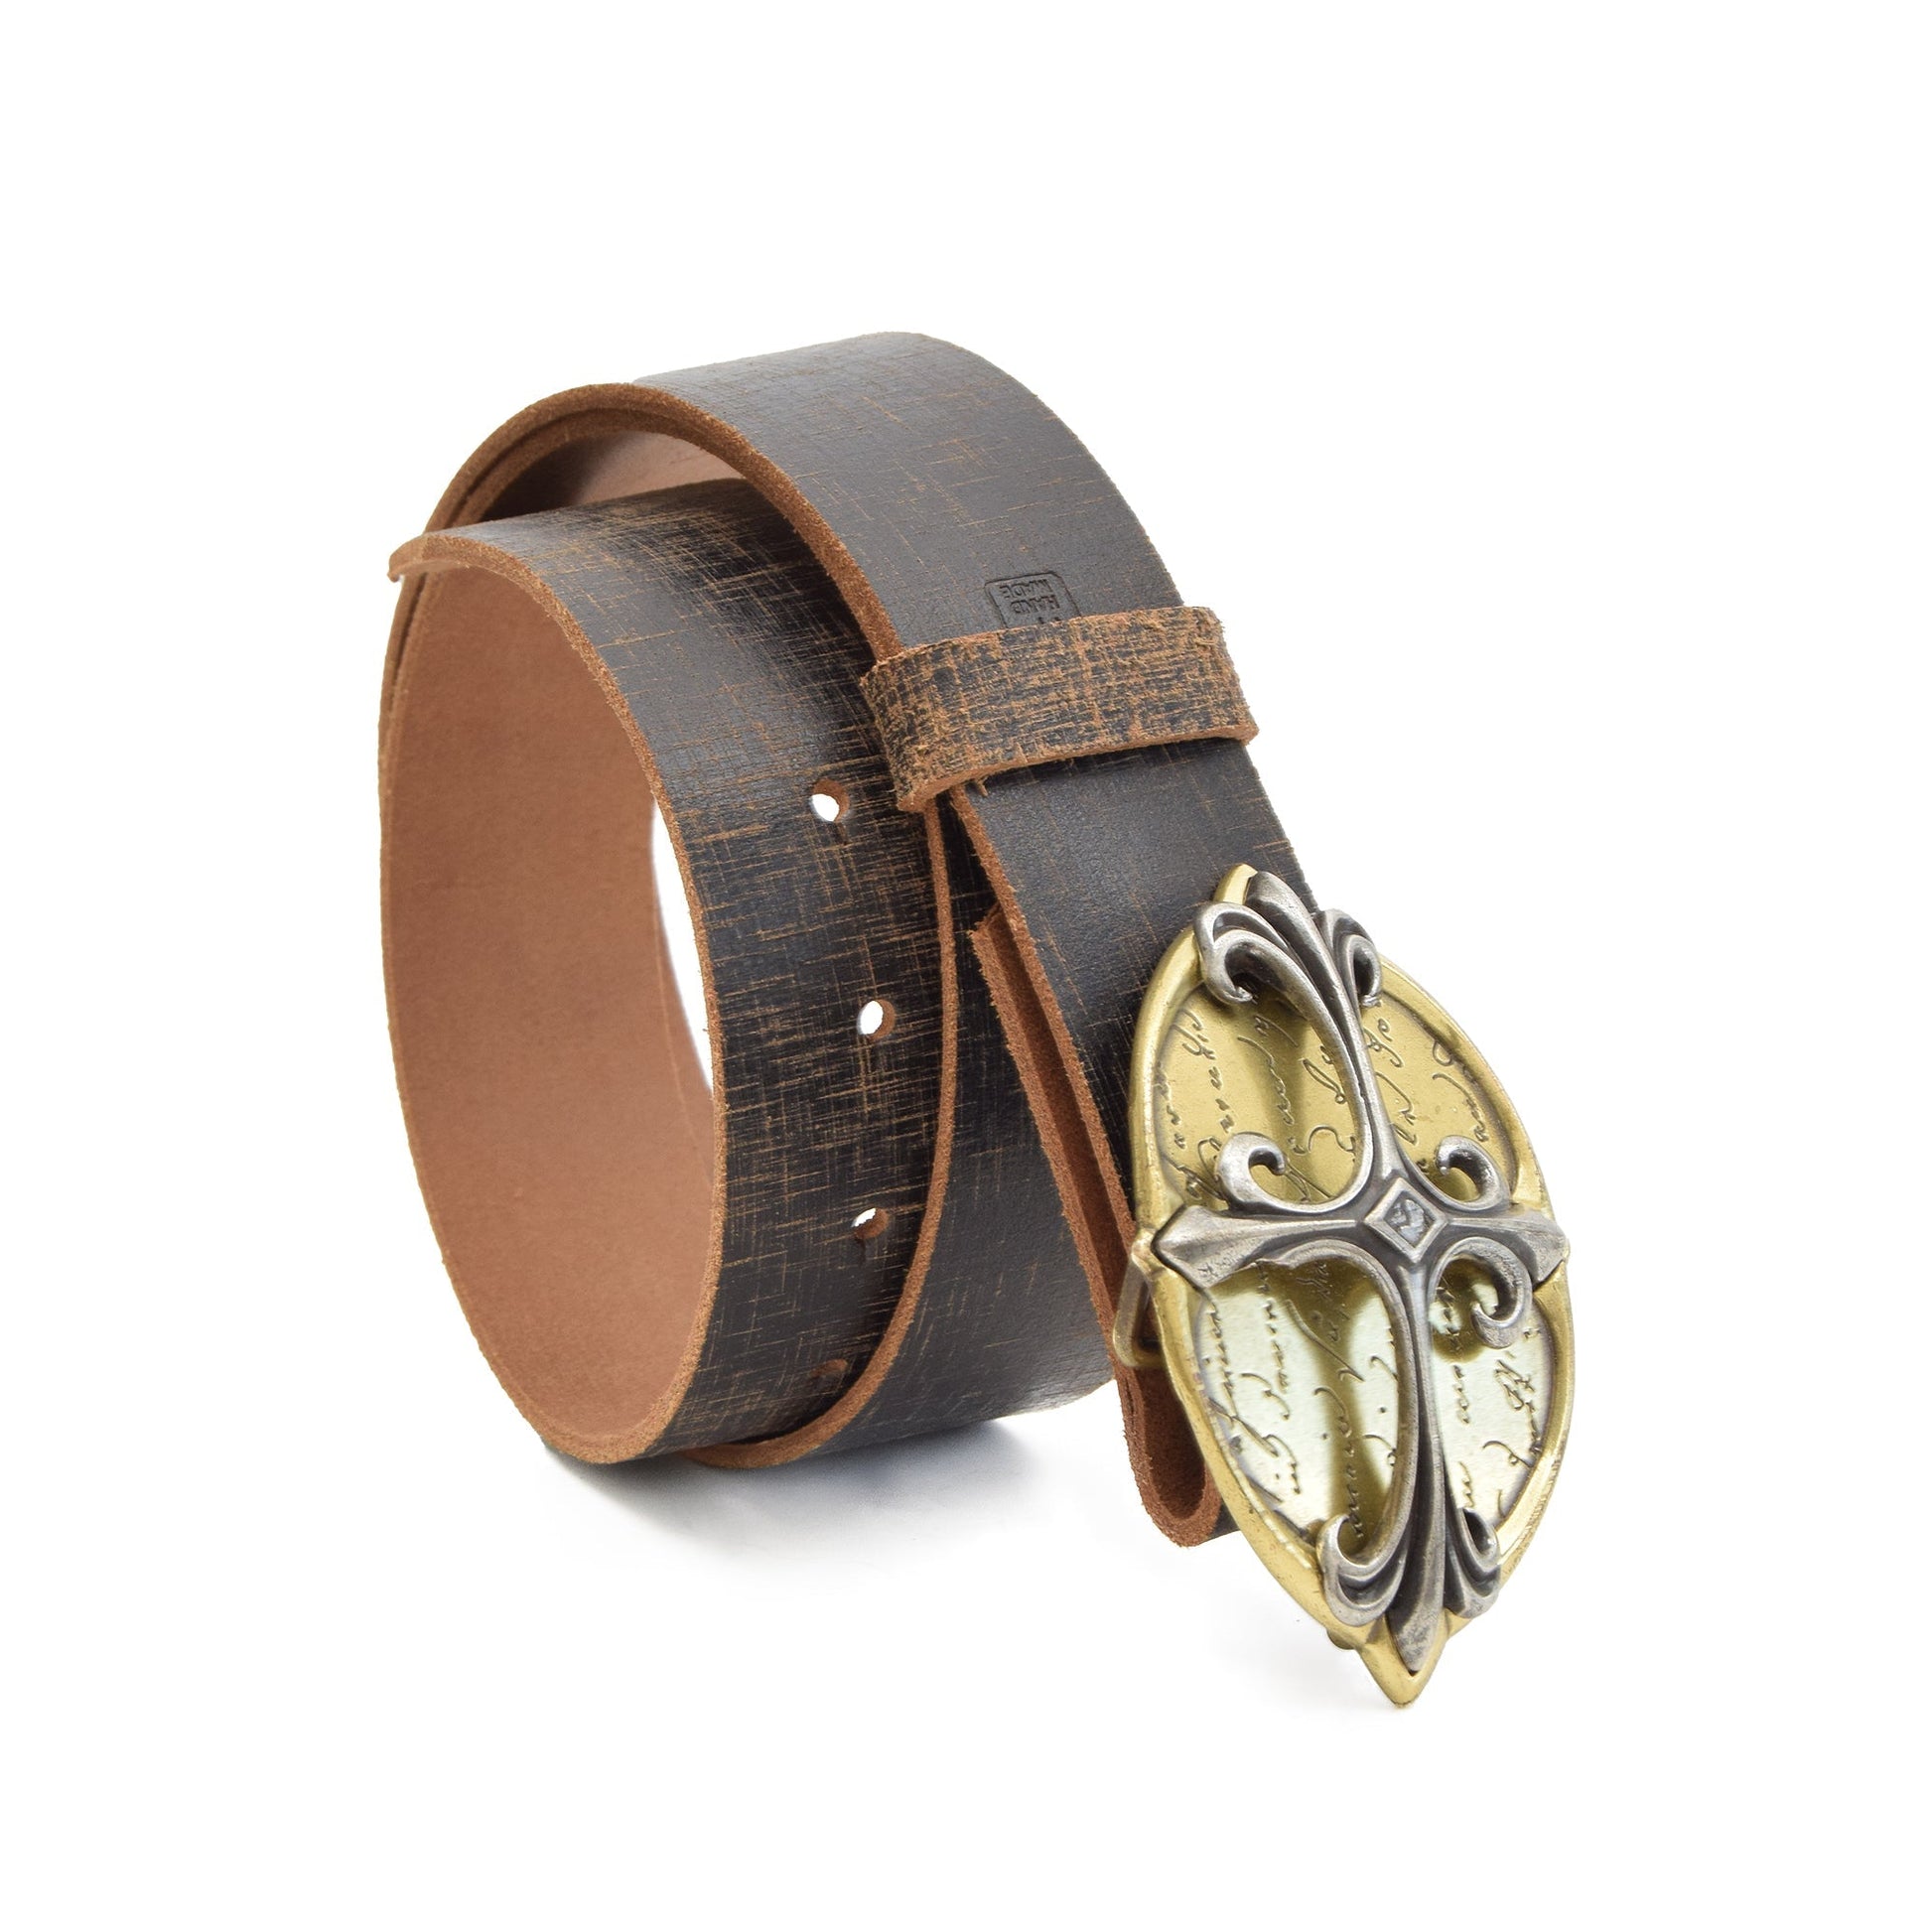 Hues Leather Belt Brown with Changeable Buckle - Belts Zengoda Shop online from Artisan Brands